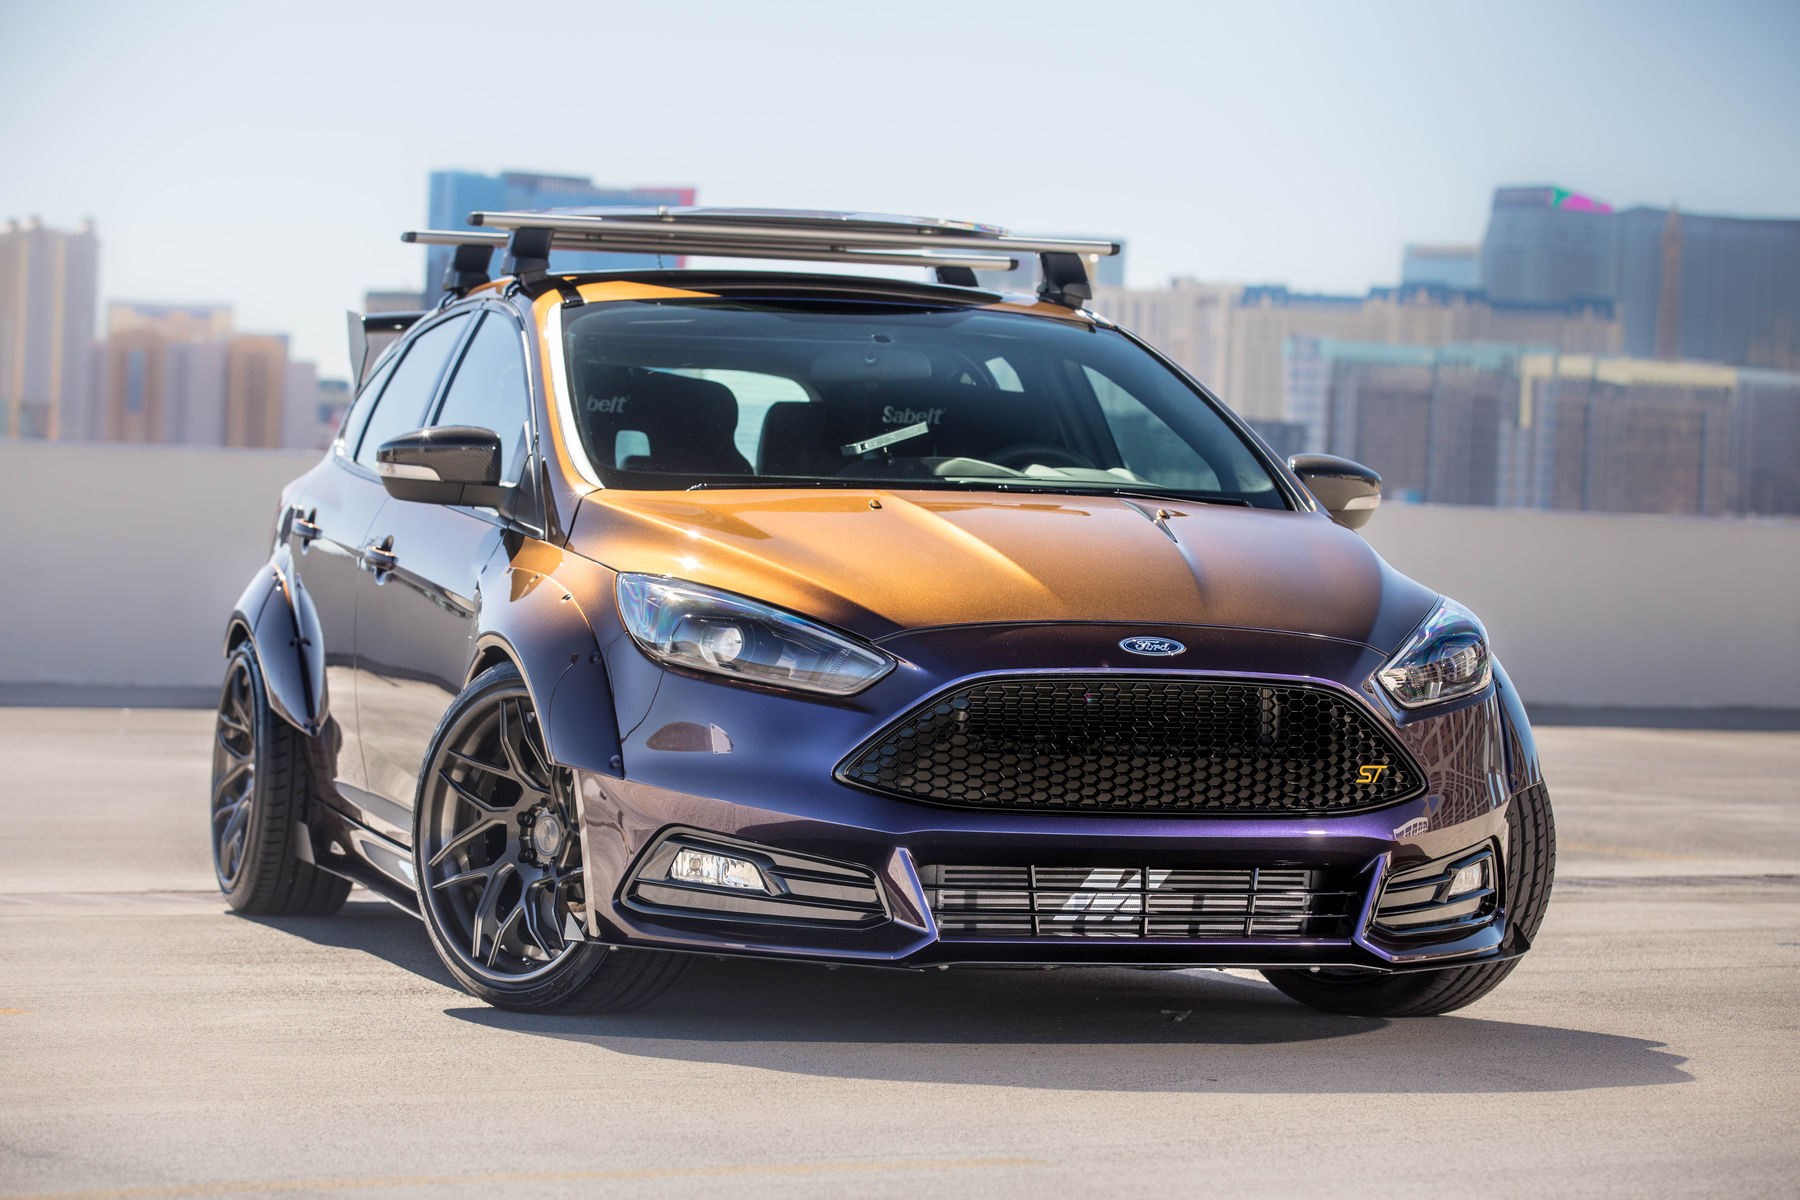 2017 Ford Focus ST By Blood Type Racing Inc. - Outside Shot FordSEMA